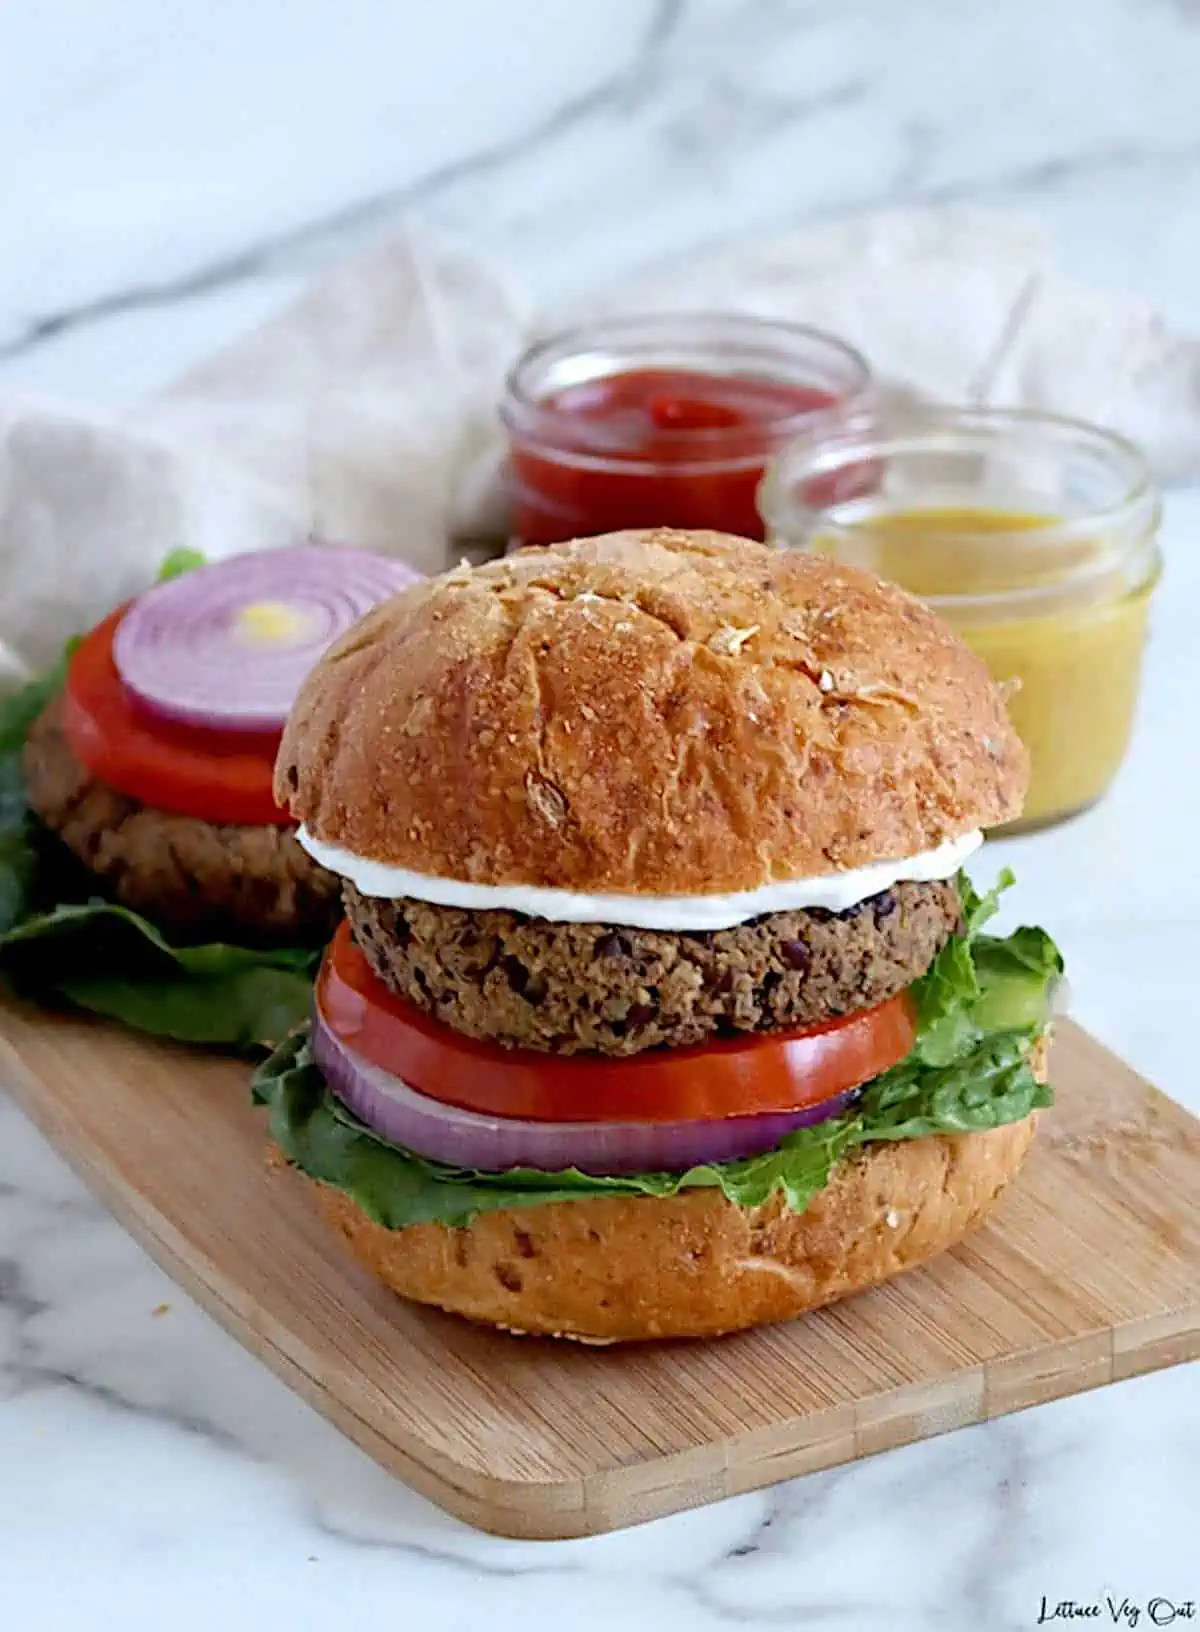 A whole food plant-based burger with toppings served in a whole wheat bun.